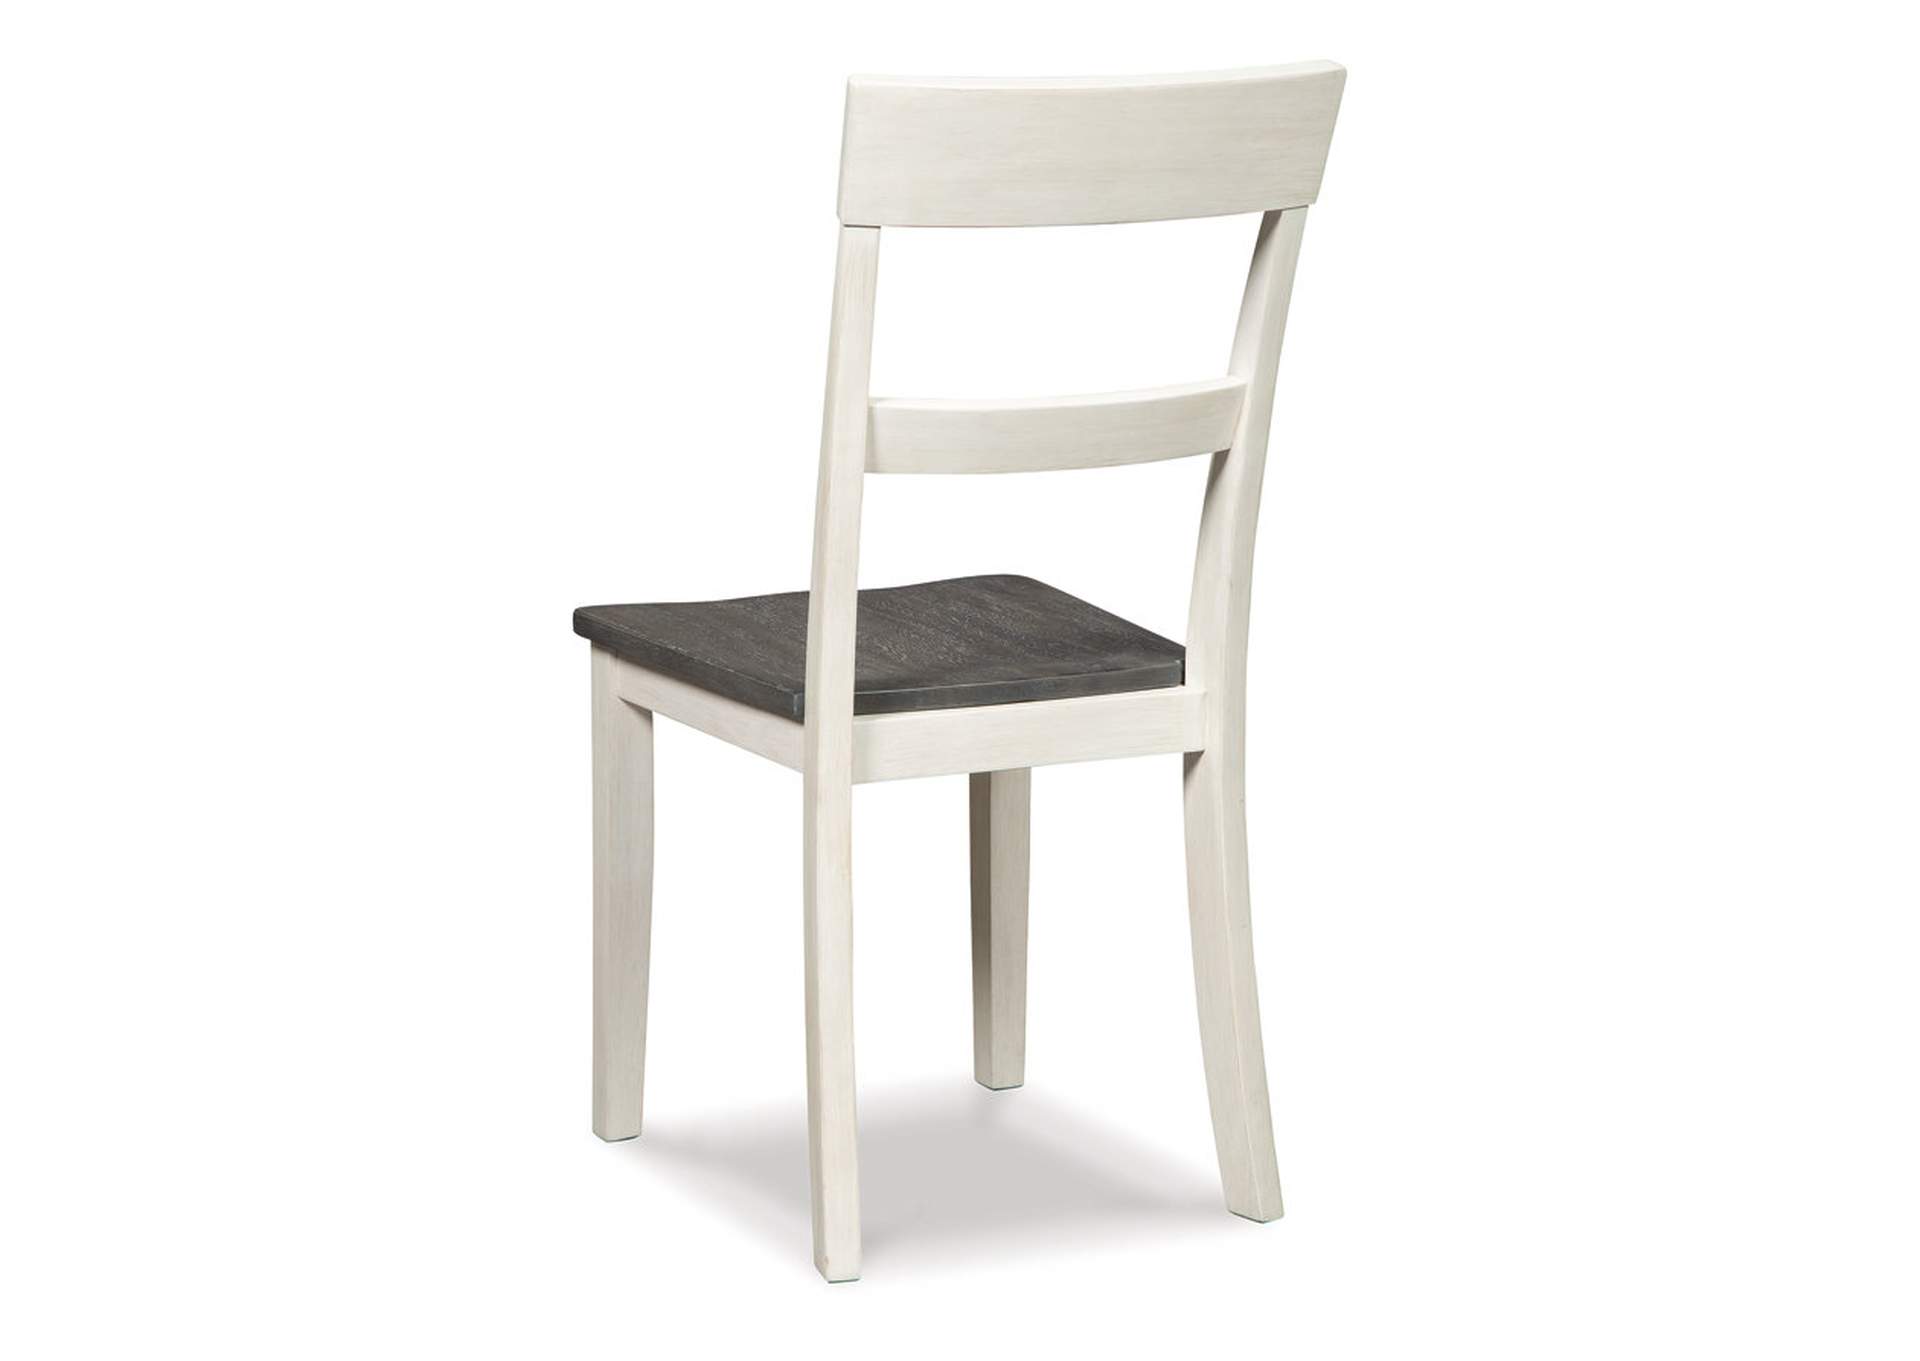 Nelling Dining Chair (Set of 2),Signature Design By Ashley